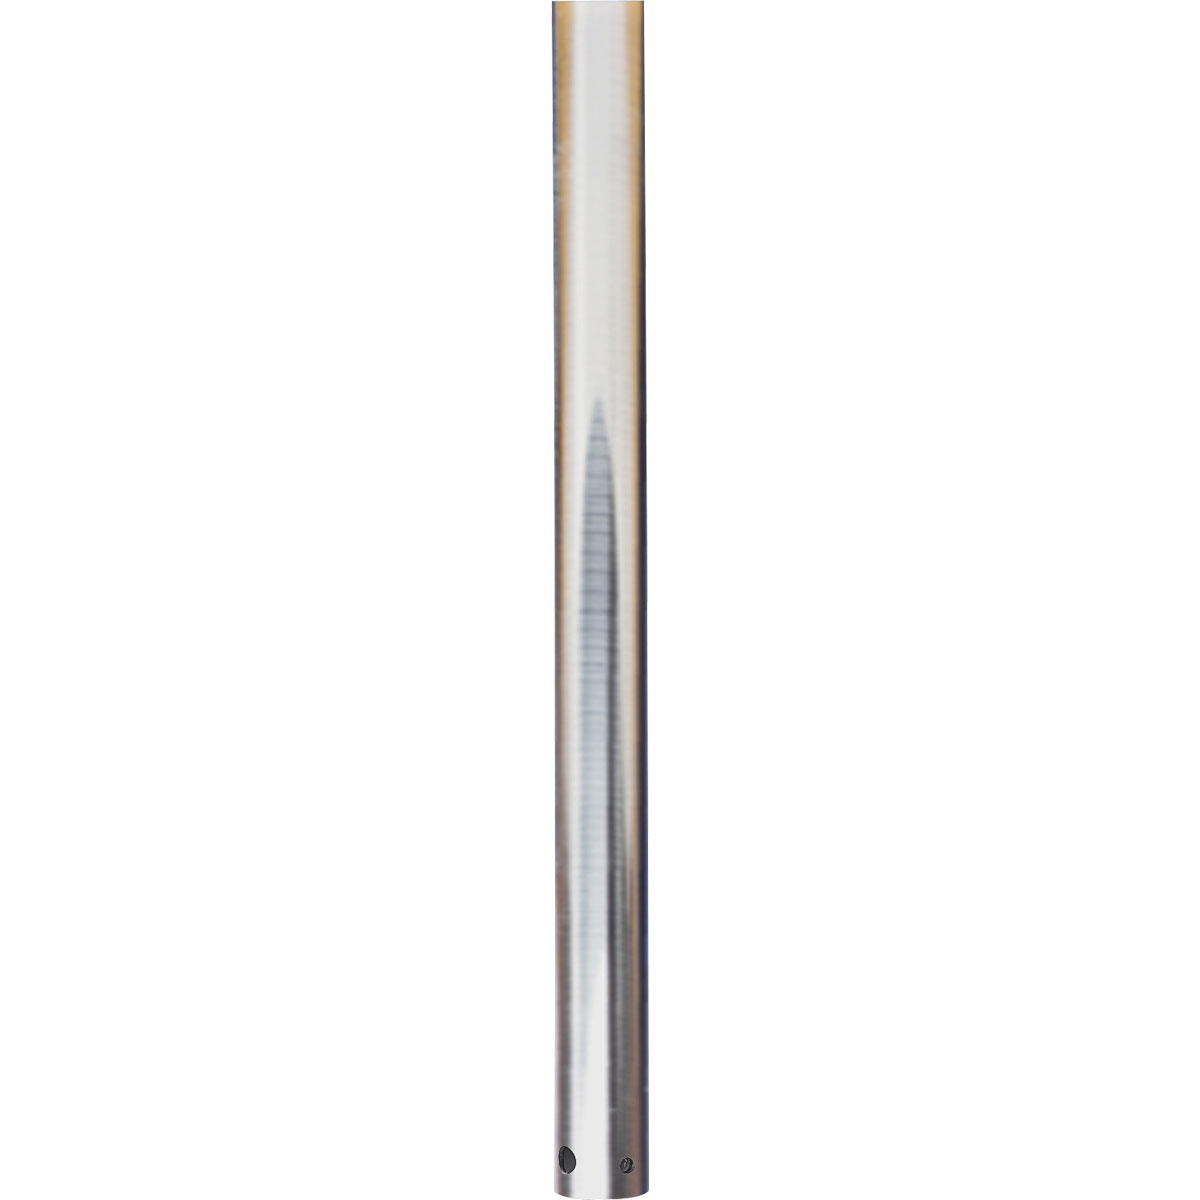 3/4 In. x 18 In. downrod for use with any Progress Lighting ceiling fan. Use of a fan downrod positions your ceiling fan at the optimal height for air circulation and provides the perfect solution for installation on high cathedral ceilings or in great rooms. Refer to the selection guide for recommended downrod lengths based upon your ceiling height. Brushed Nickel finish.